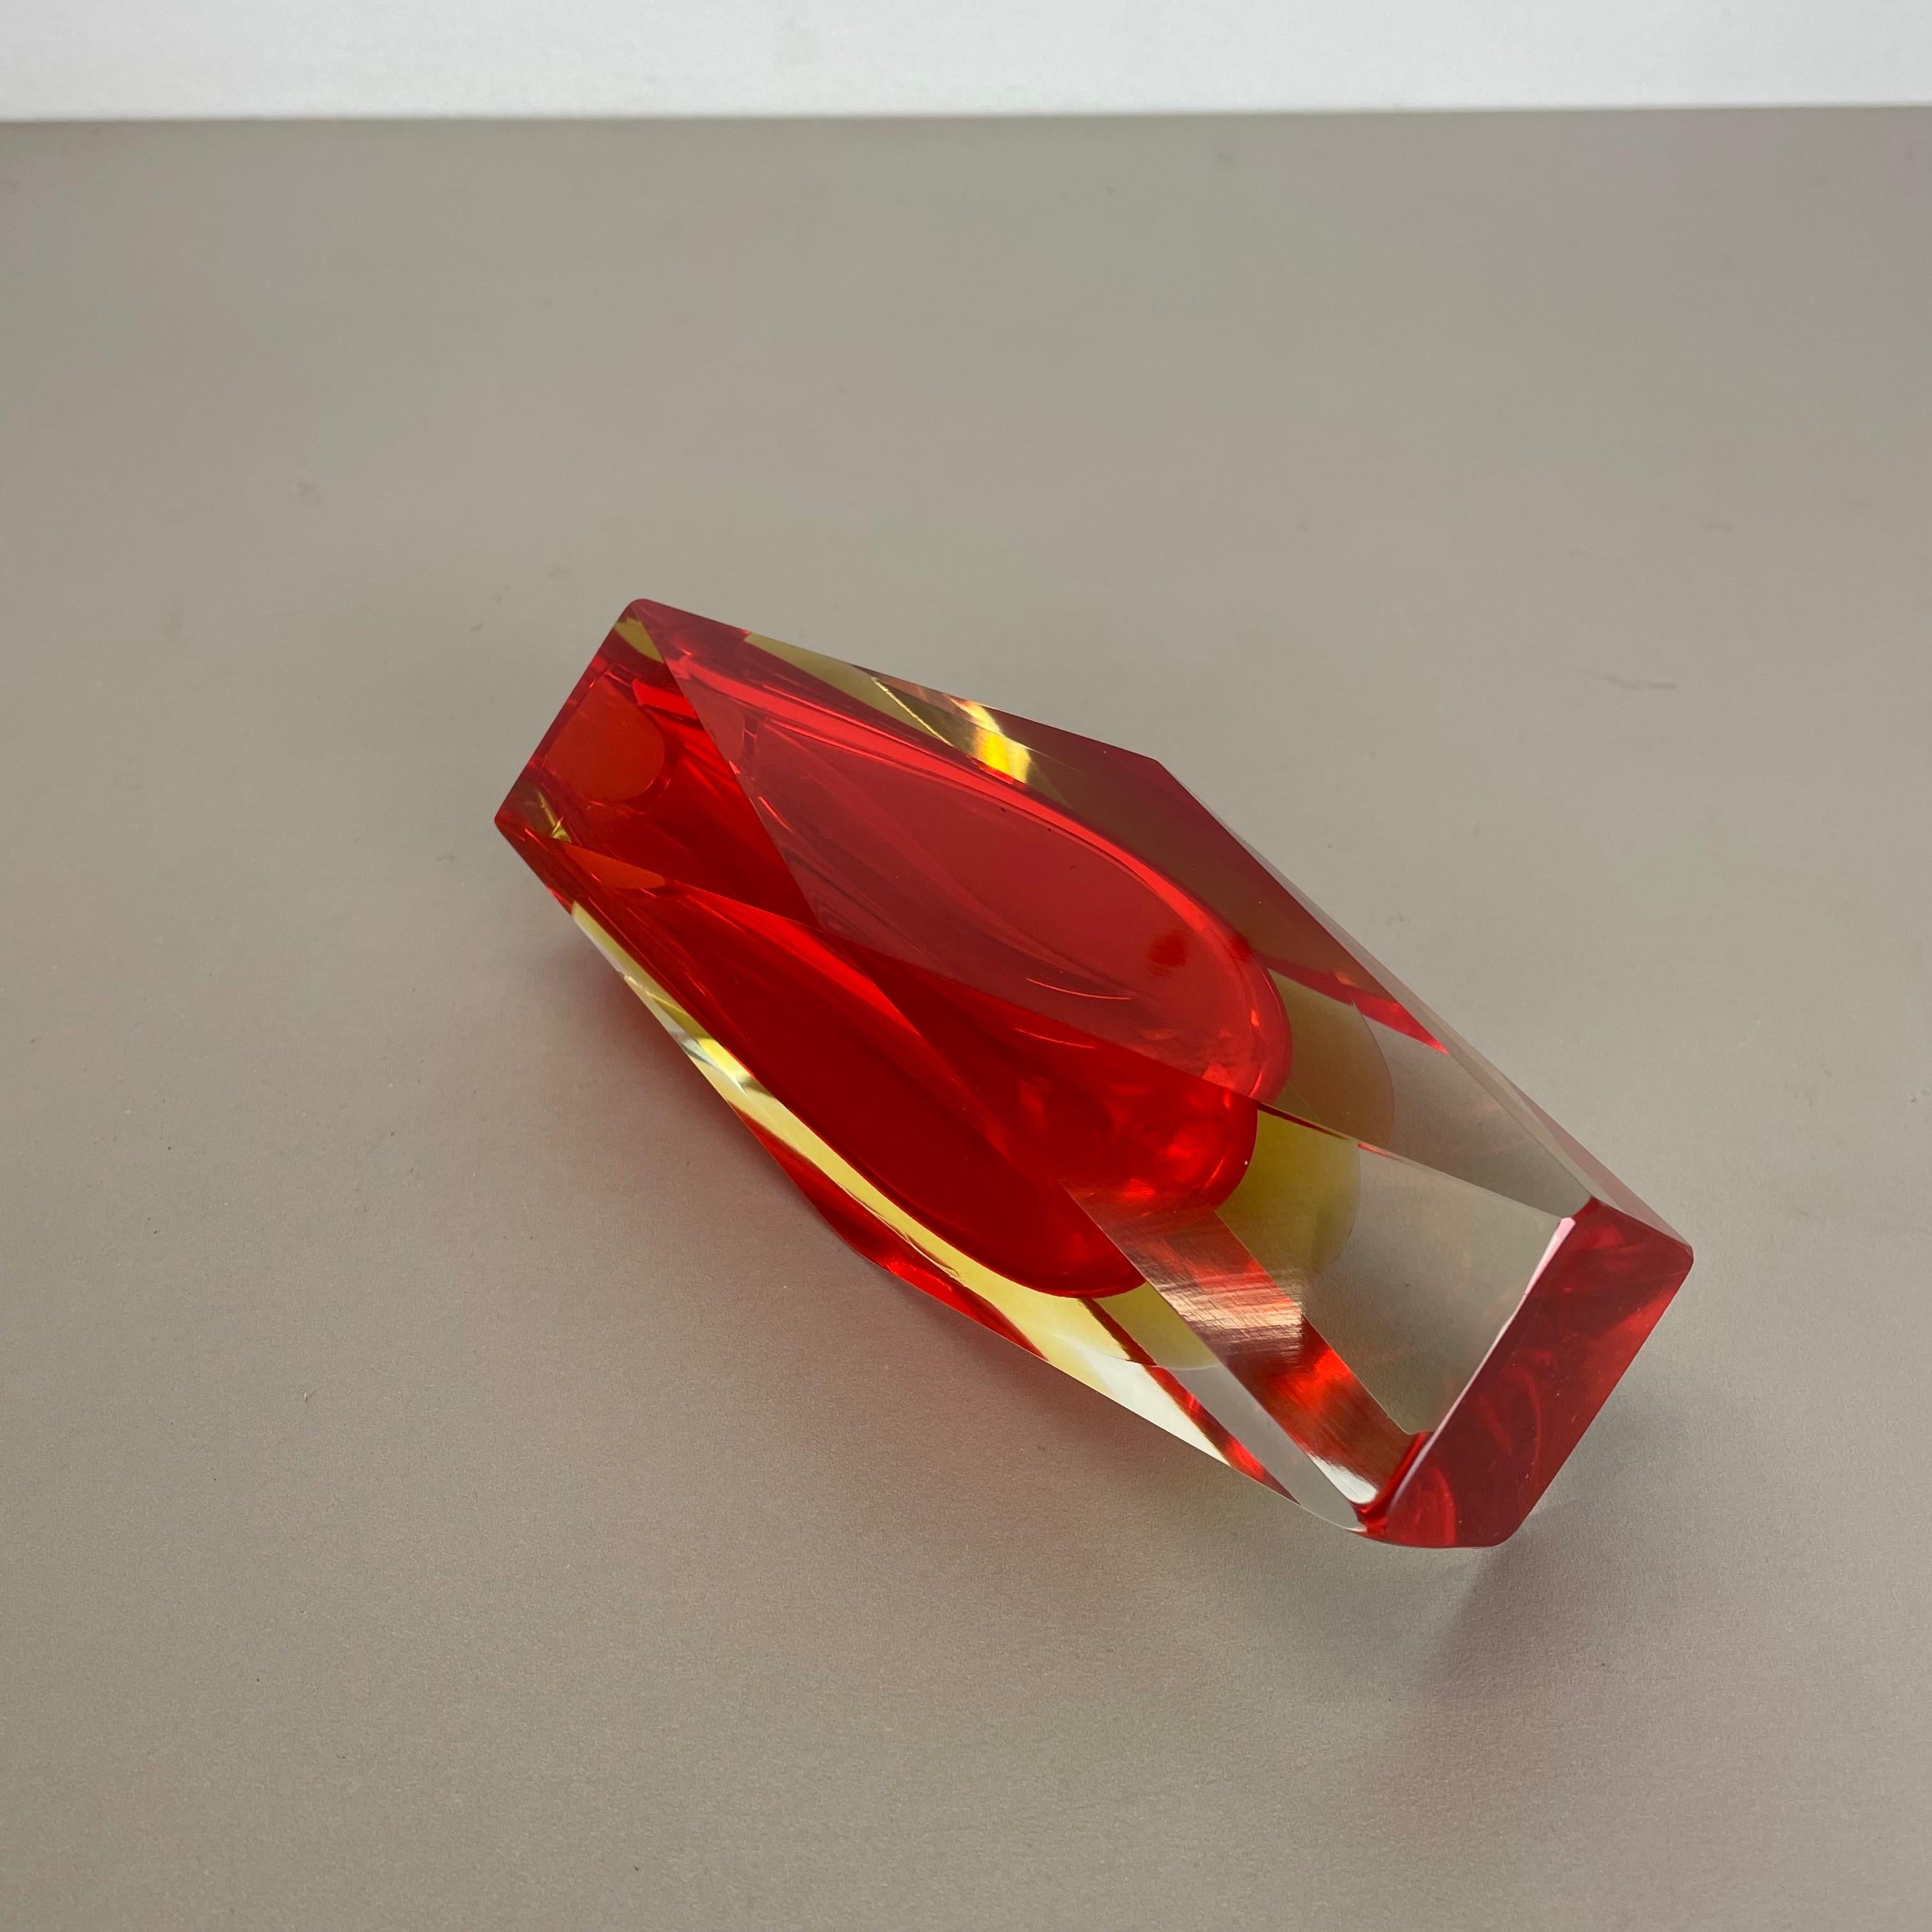 Large Red Murano Glass Sommerso Vase by Flavio Poli Attributed, Italy 1970s For Sale 9